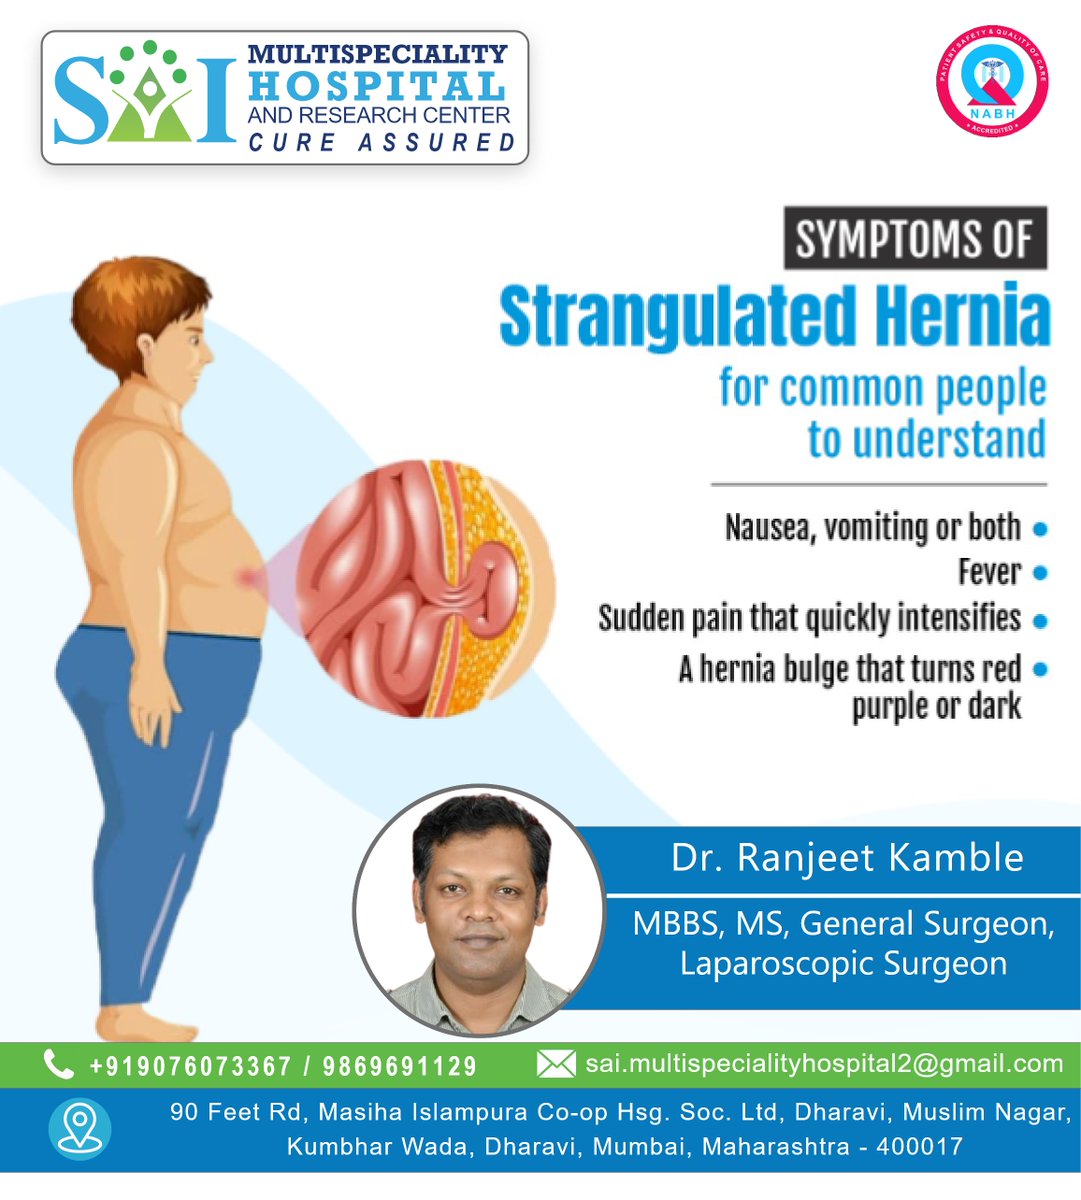 Sai Multispeciality Hospital ResearchCentre
SYMPTOMS OF
Strangulated Hernia for common people to understand

Dr. Ranjeet Kamble
MBBS, MS, General Surgeon, Laparoscopic Surgeon
Book Appointment Now: +919076073367 / 9869691129